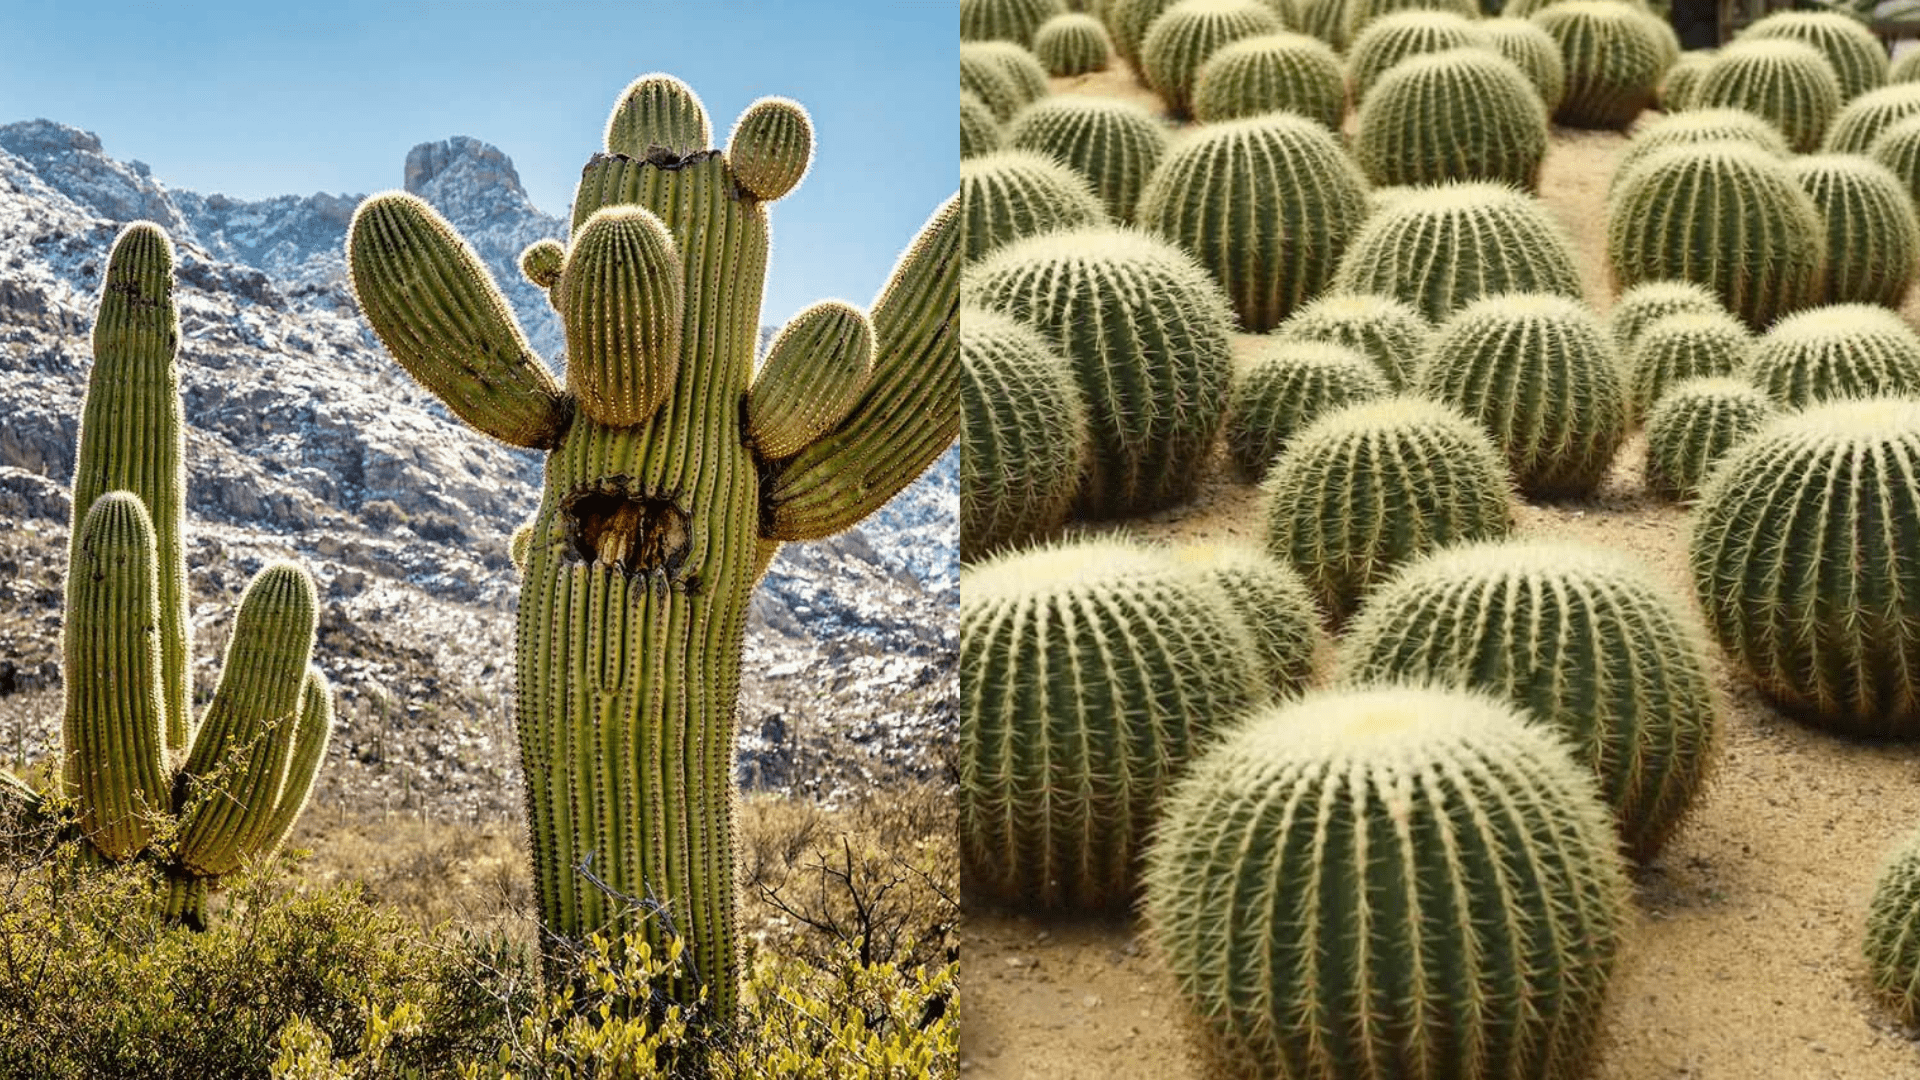 How Are Cactus Adapted to Survive in a Desert